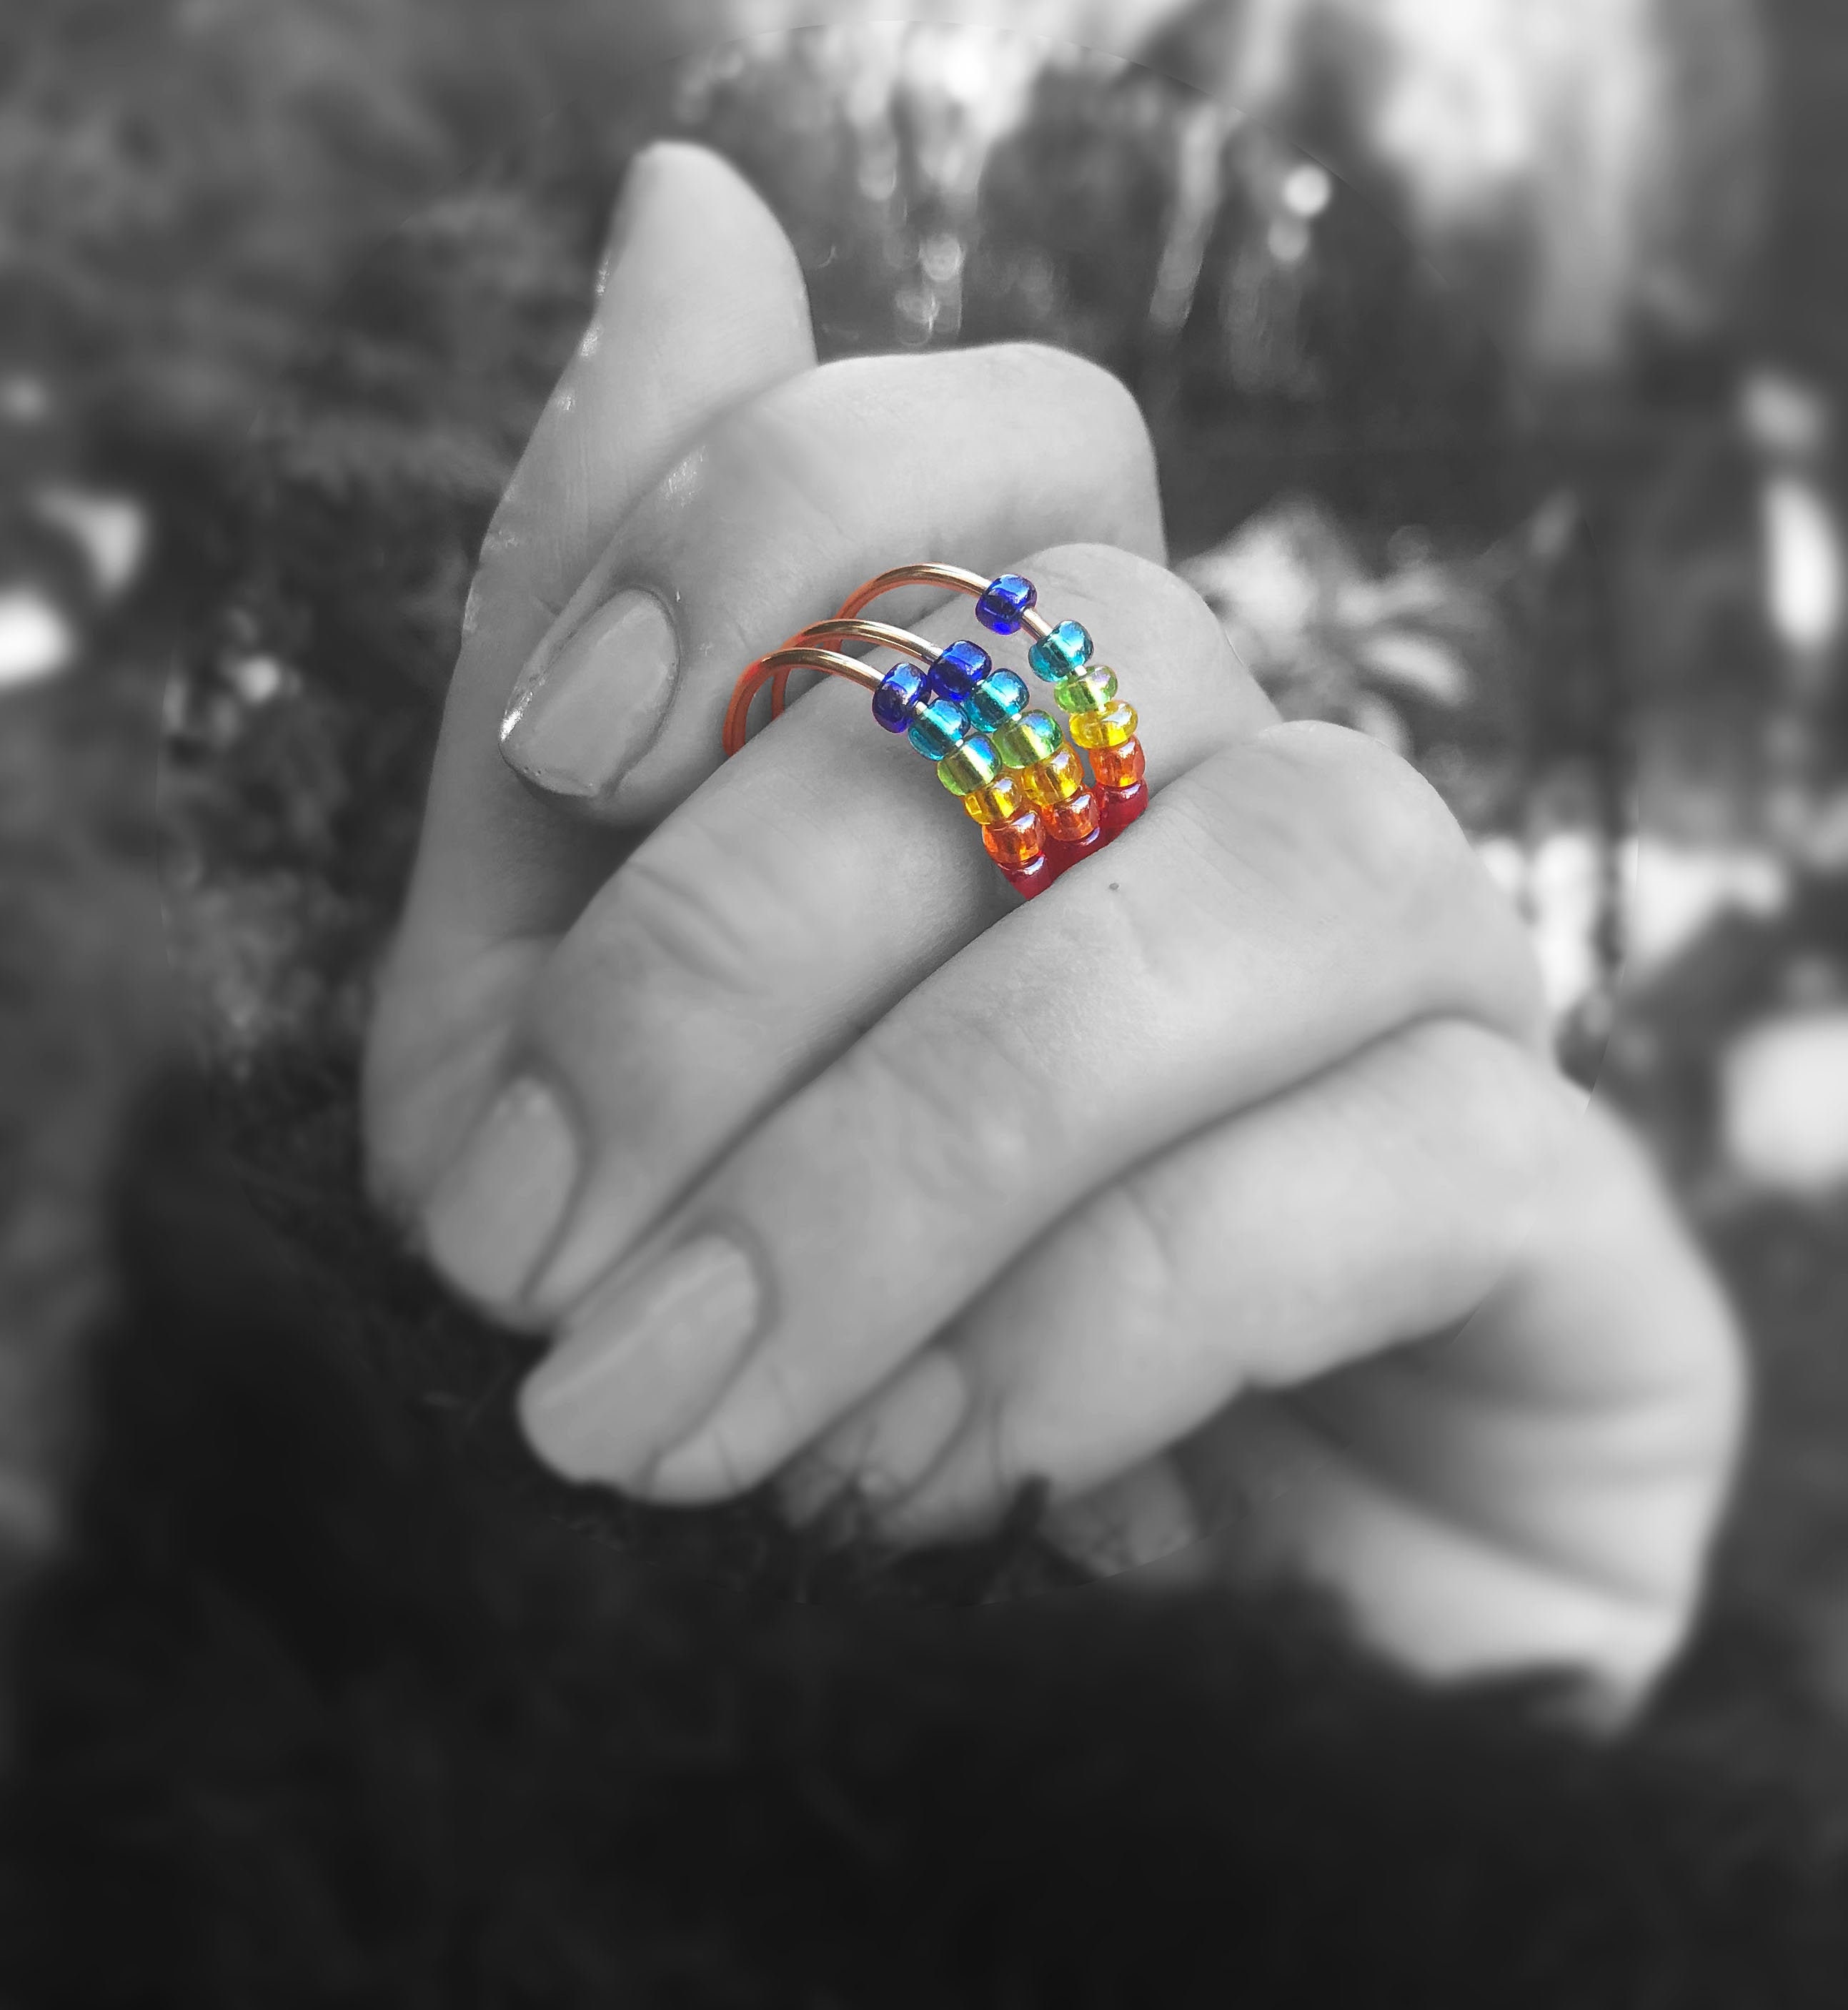 Resin Finger Rings Rainbow Acrylic Multi Color Glitter Ring Size 7-9 Jewelry